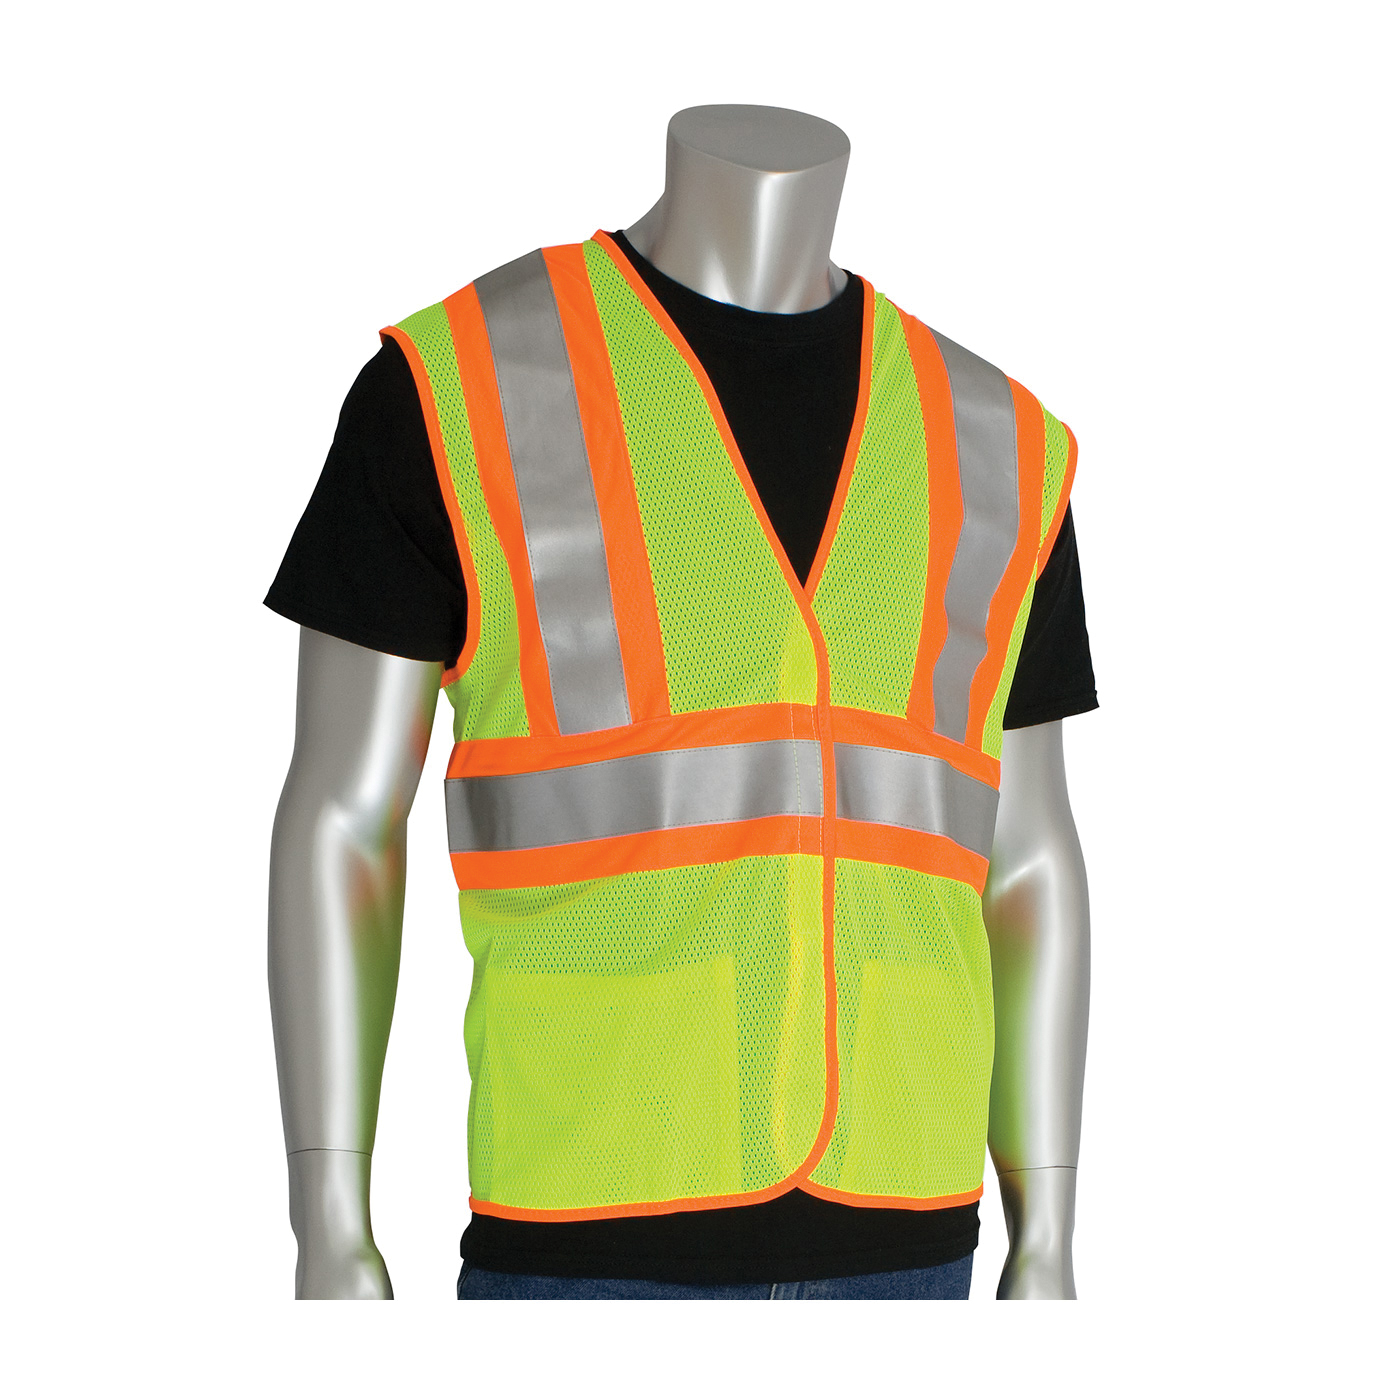 PIP® 305-MVFRLY-4X/5X 2-Tone FR Treated Safety Vest, 4XL/5XL, Hi-Viz Lime Yellow, Polyester, Hook and Loop Closure, 2 Pockets, ANSI Class: Class 2, Specifications Met: ANSI Specified